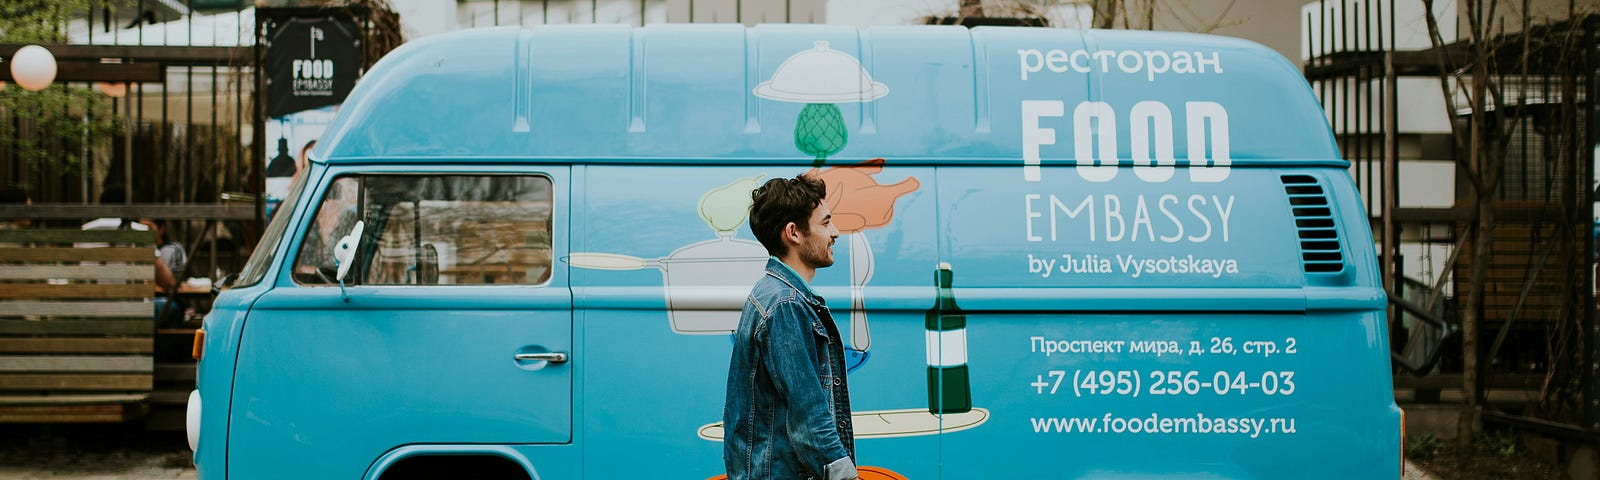 A hipster young man walking around the streets was photographed in front of a blue hippie van